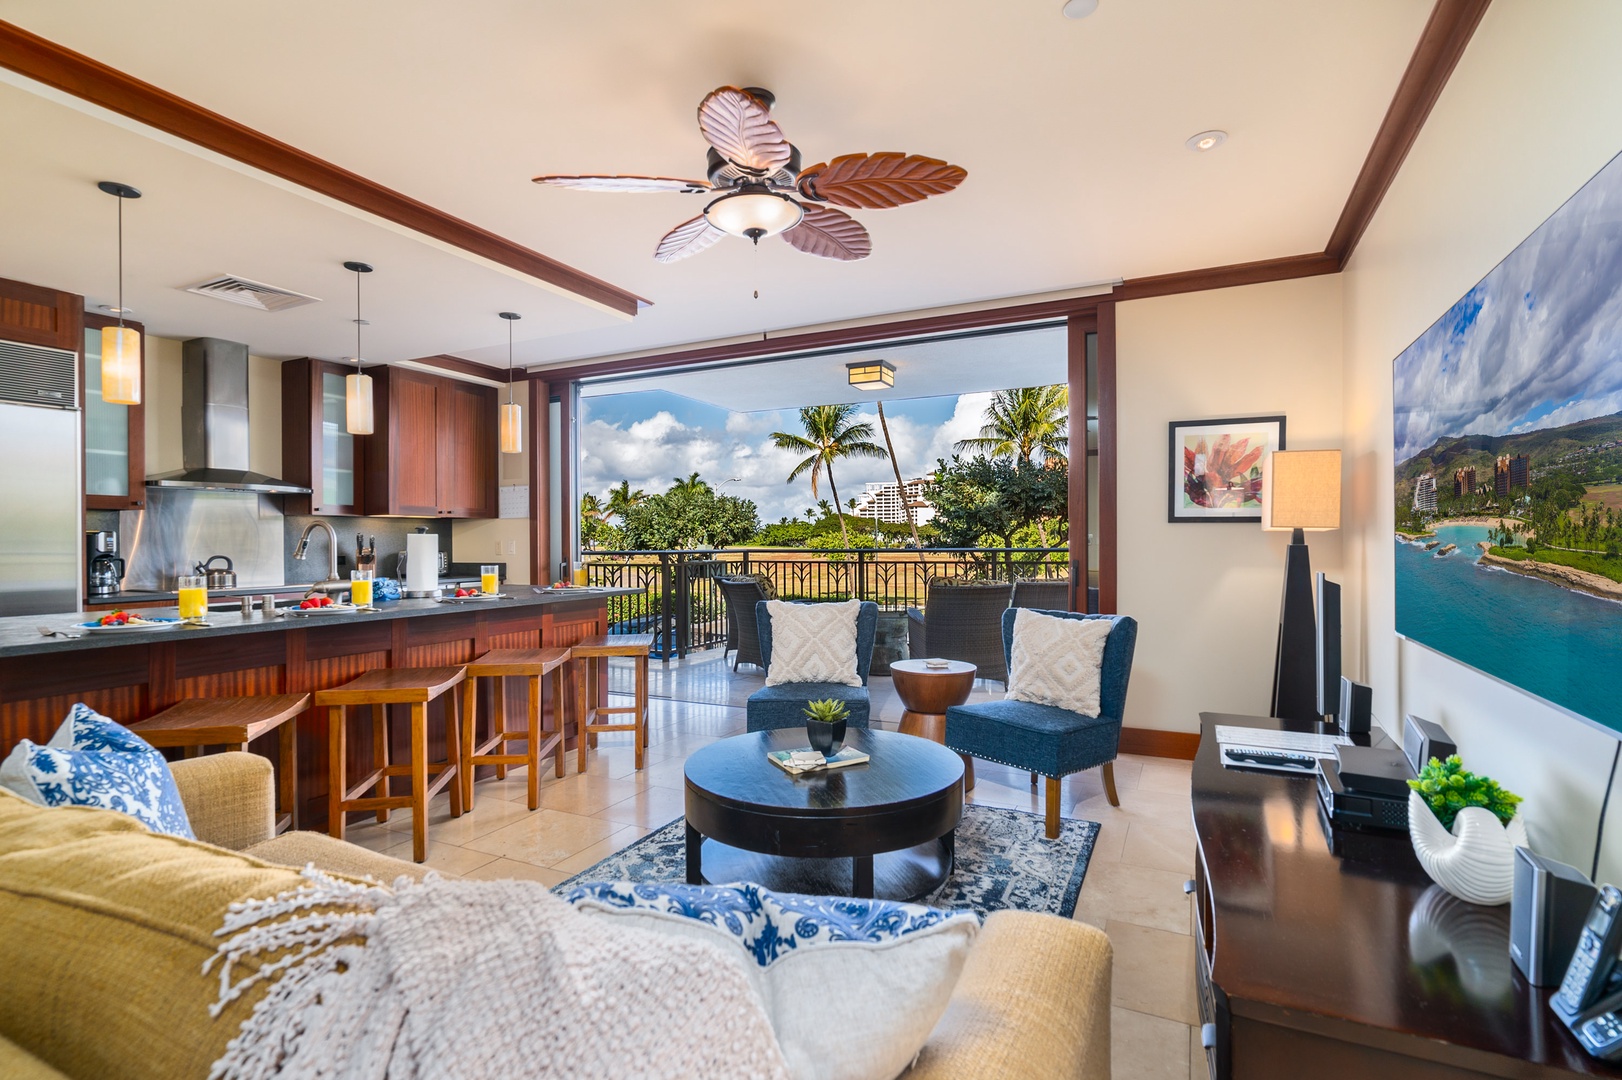 Spacious living area with a private lanai for incredible indoor-outdoor living